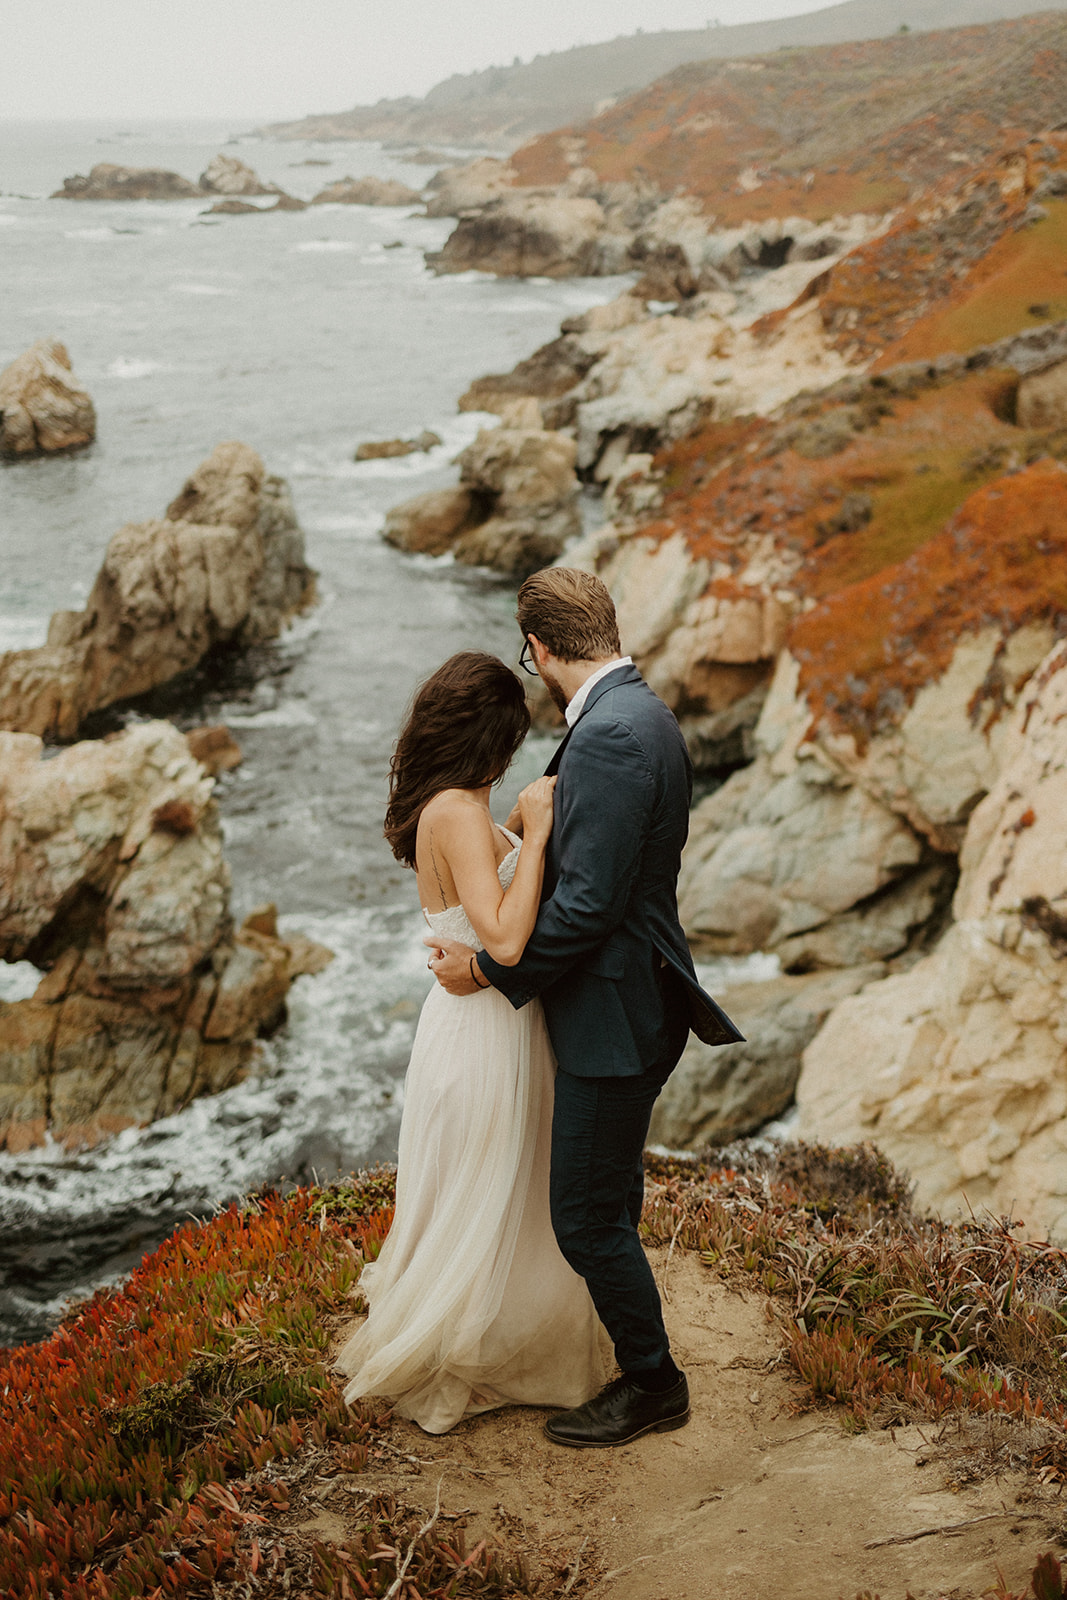 the couple standing together and looking down at the water and rocks below